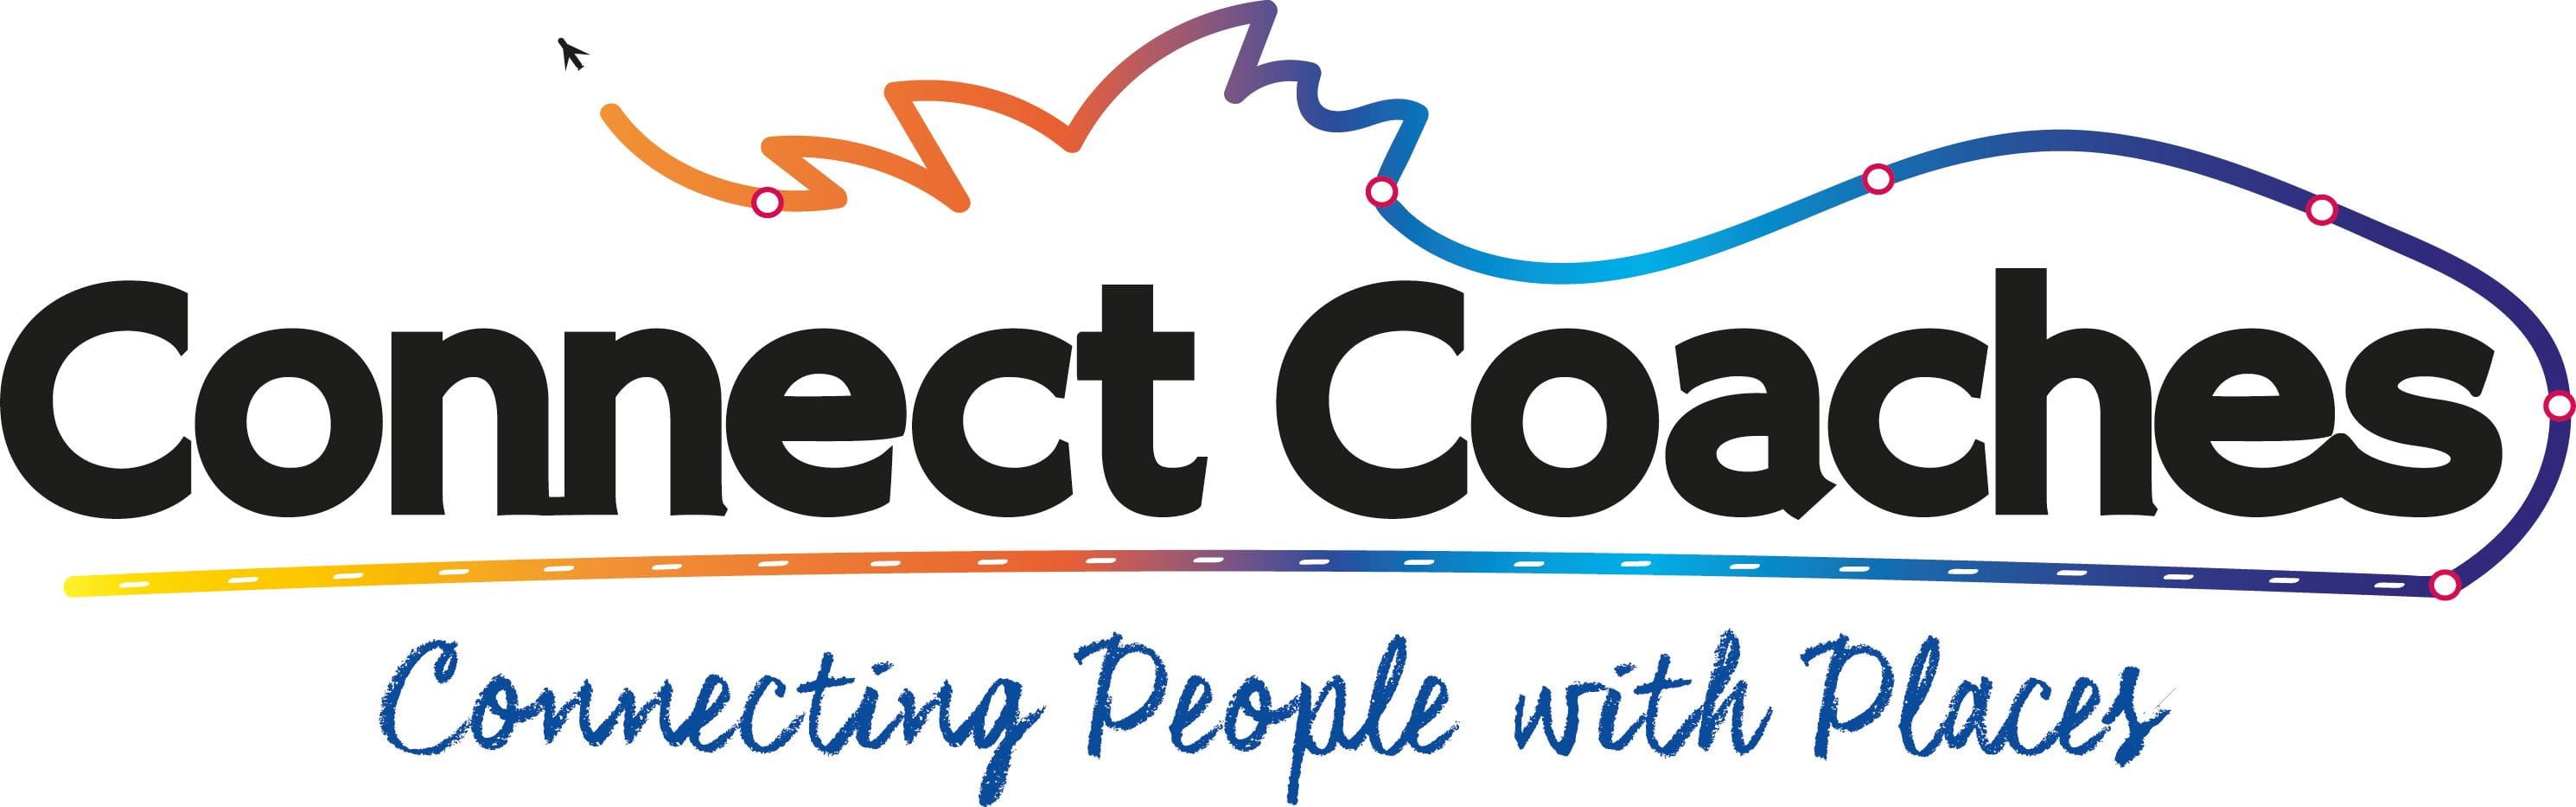 Connect Coaches Connecting People with Places